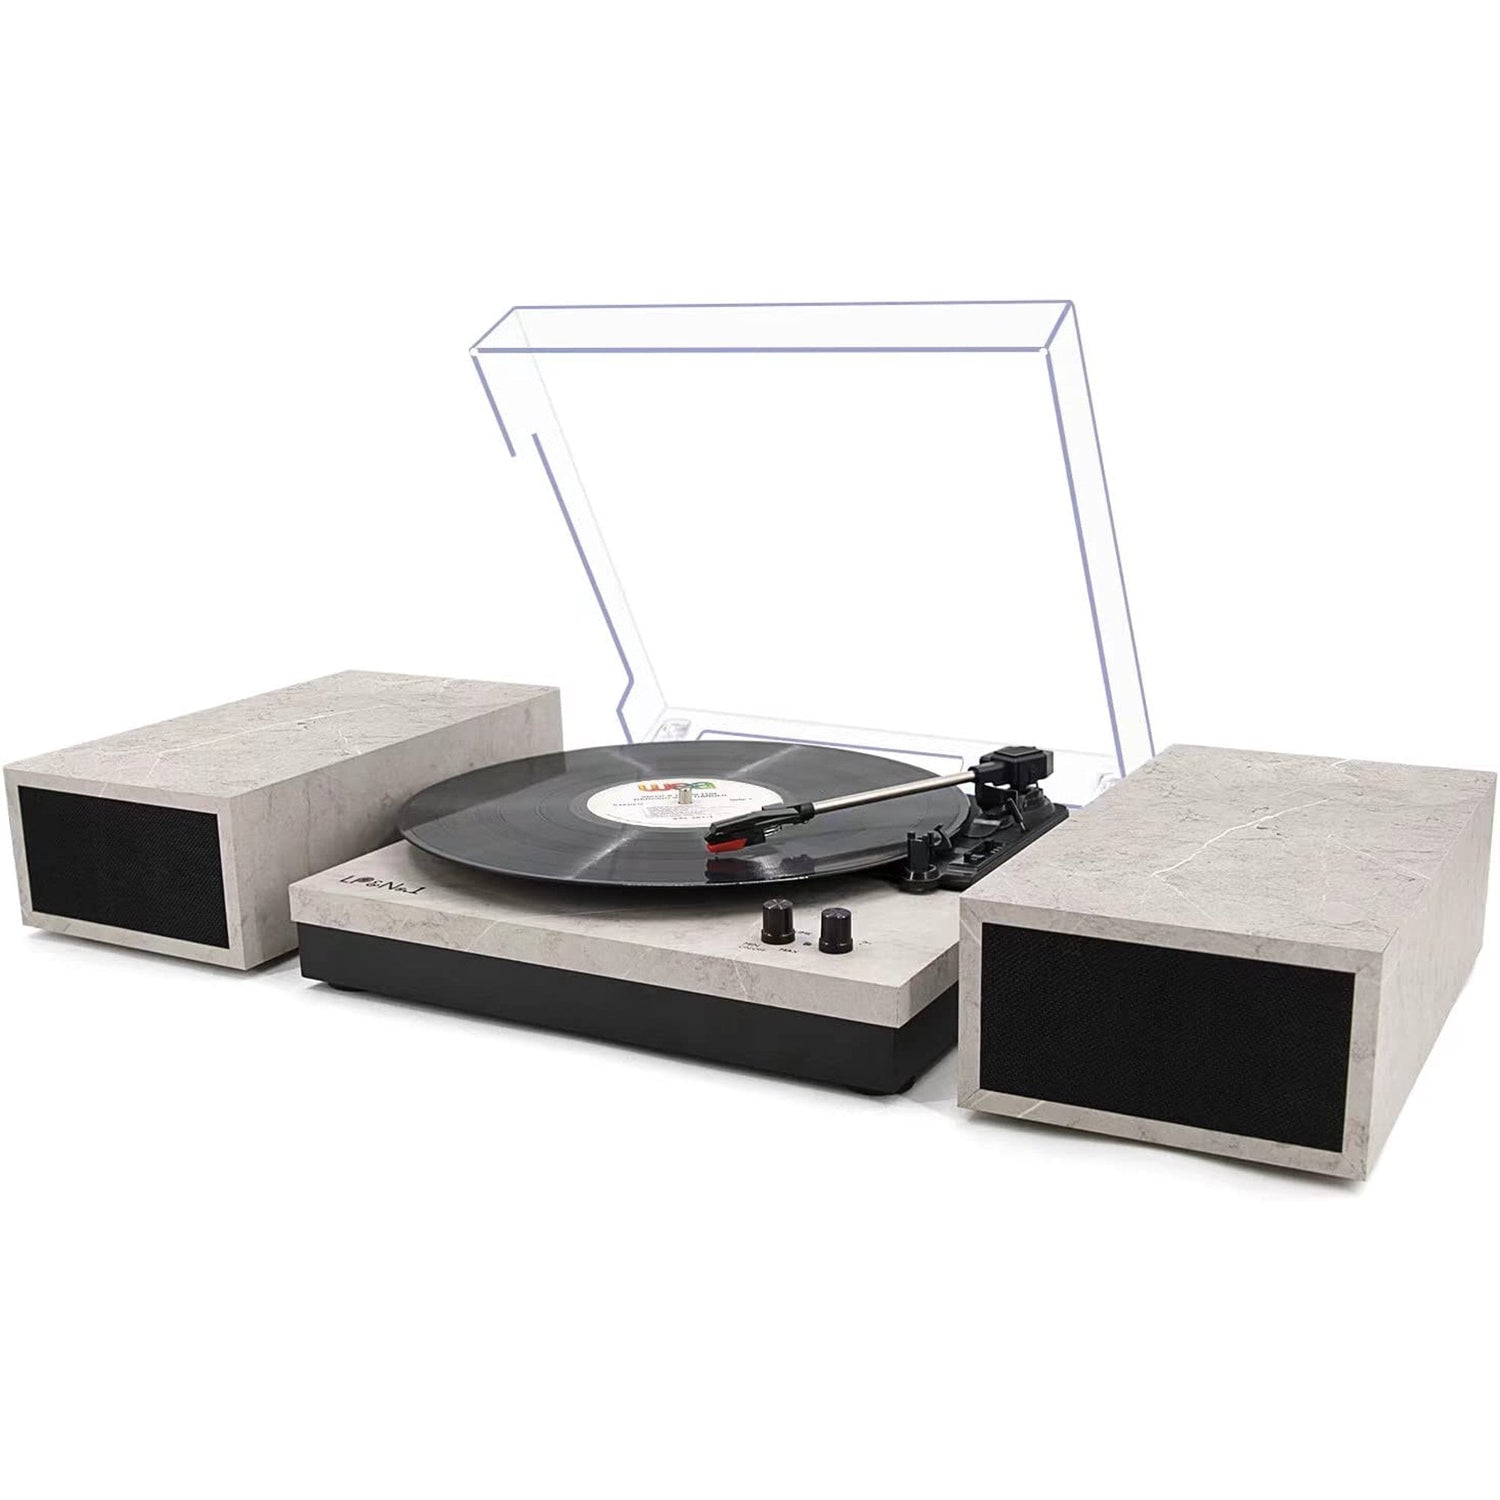 LP&No.1 Record Player, Bluetooth Vinyl Turntable with Stereo Bookshelf Speakers Sigbeez